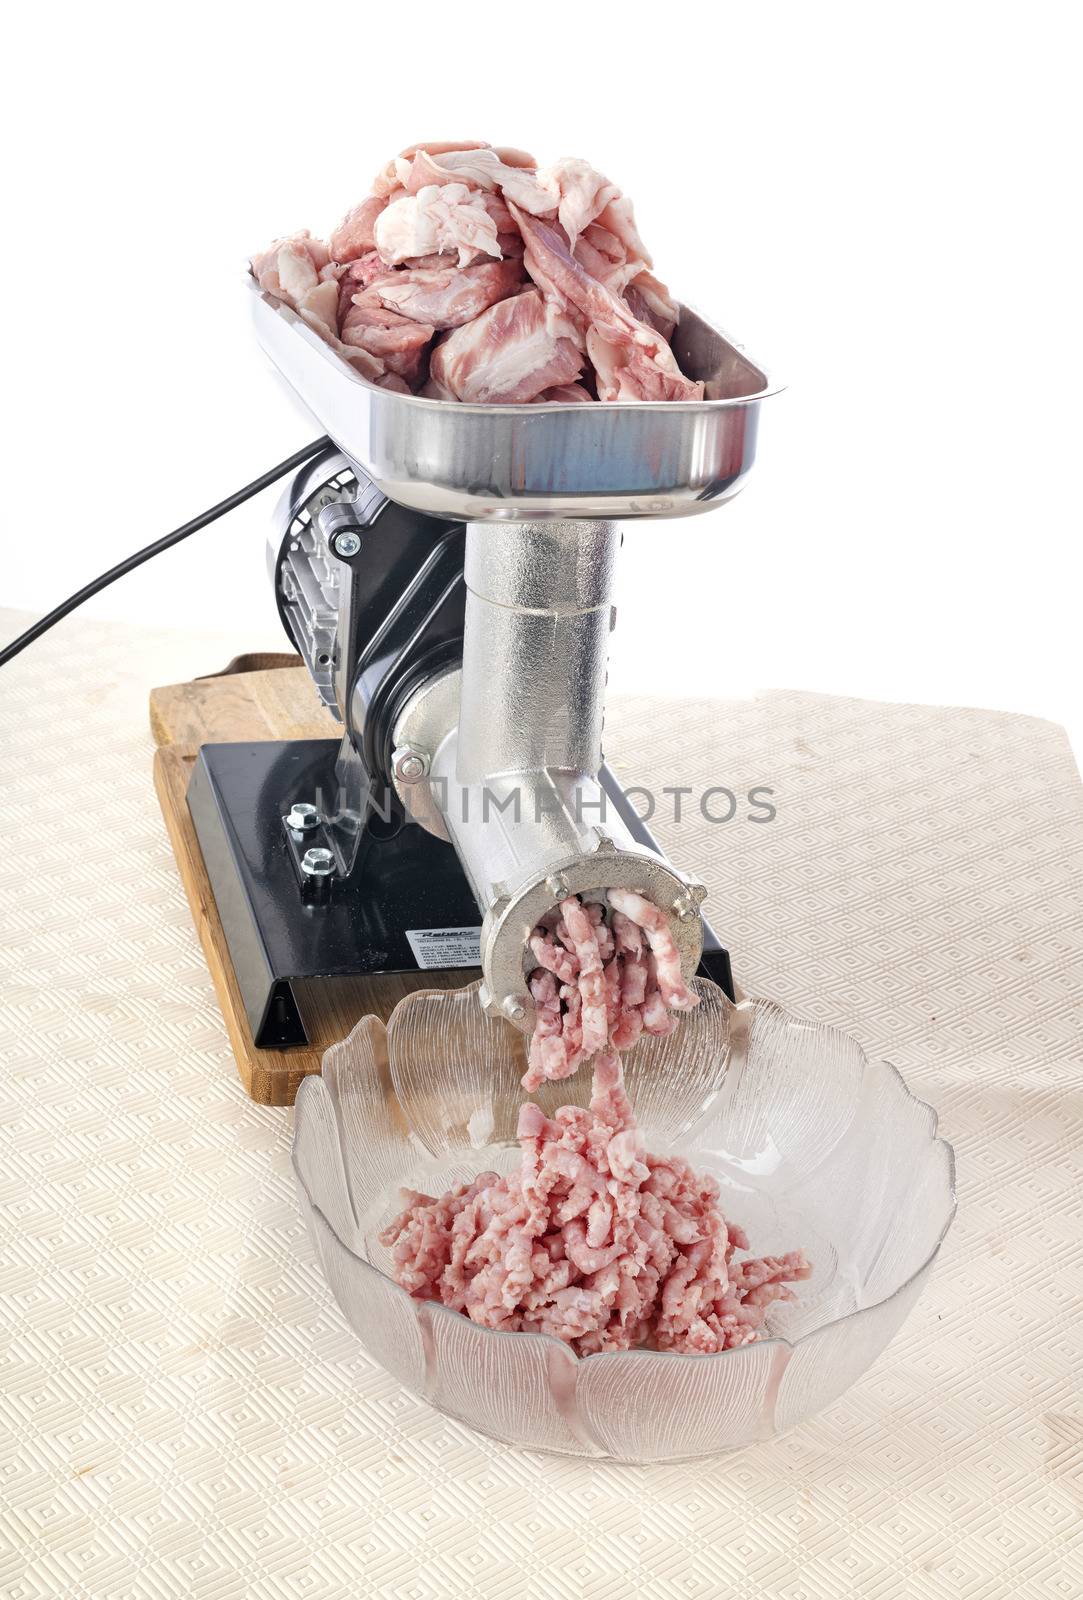 meat mincer in front of white background